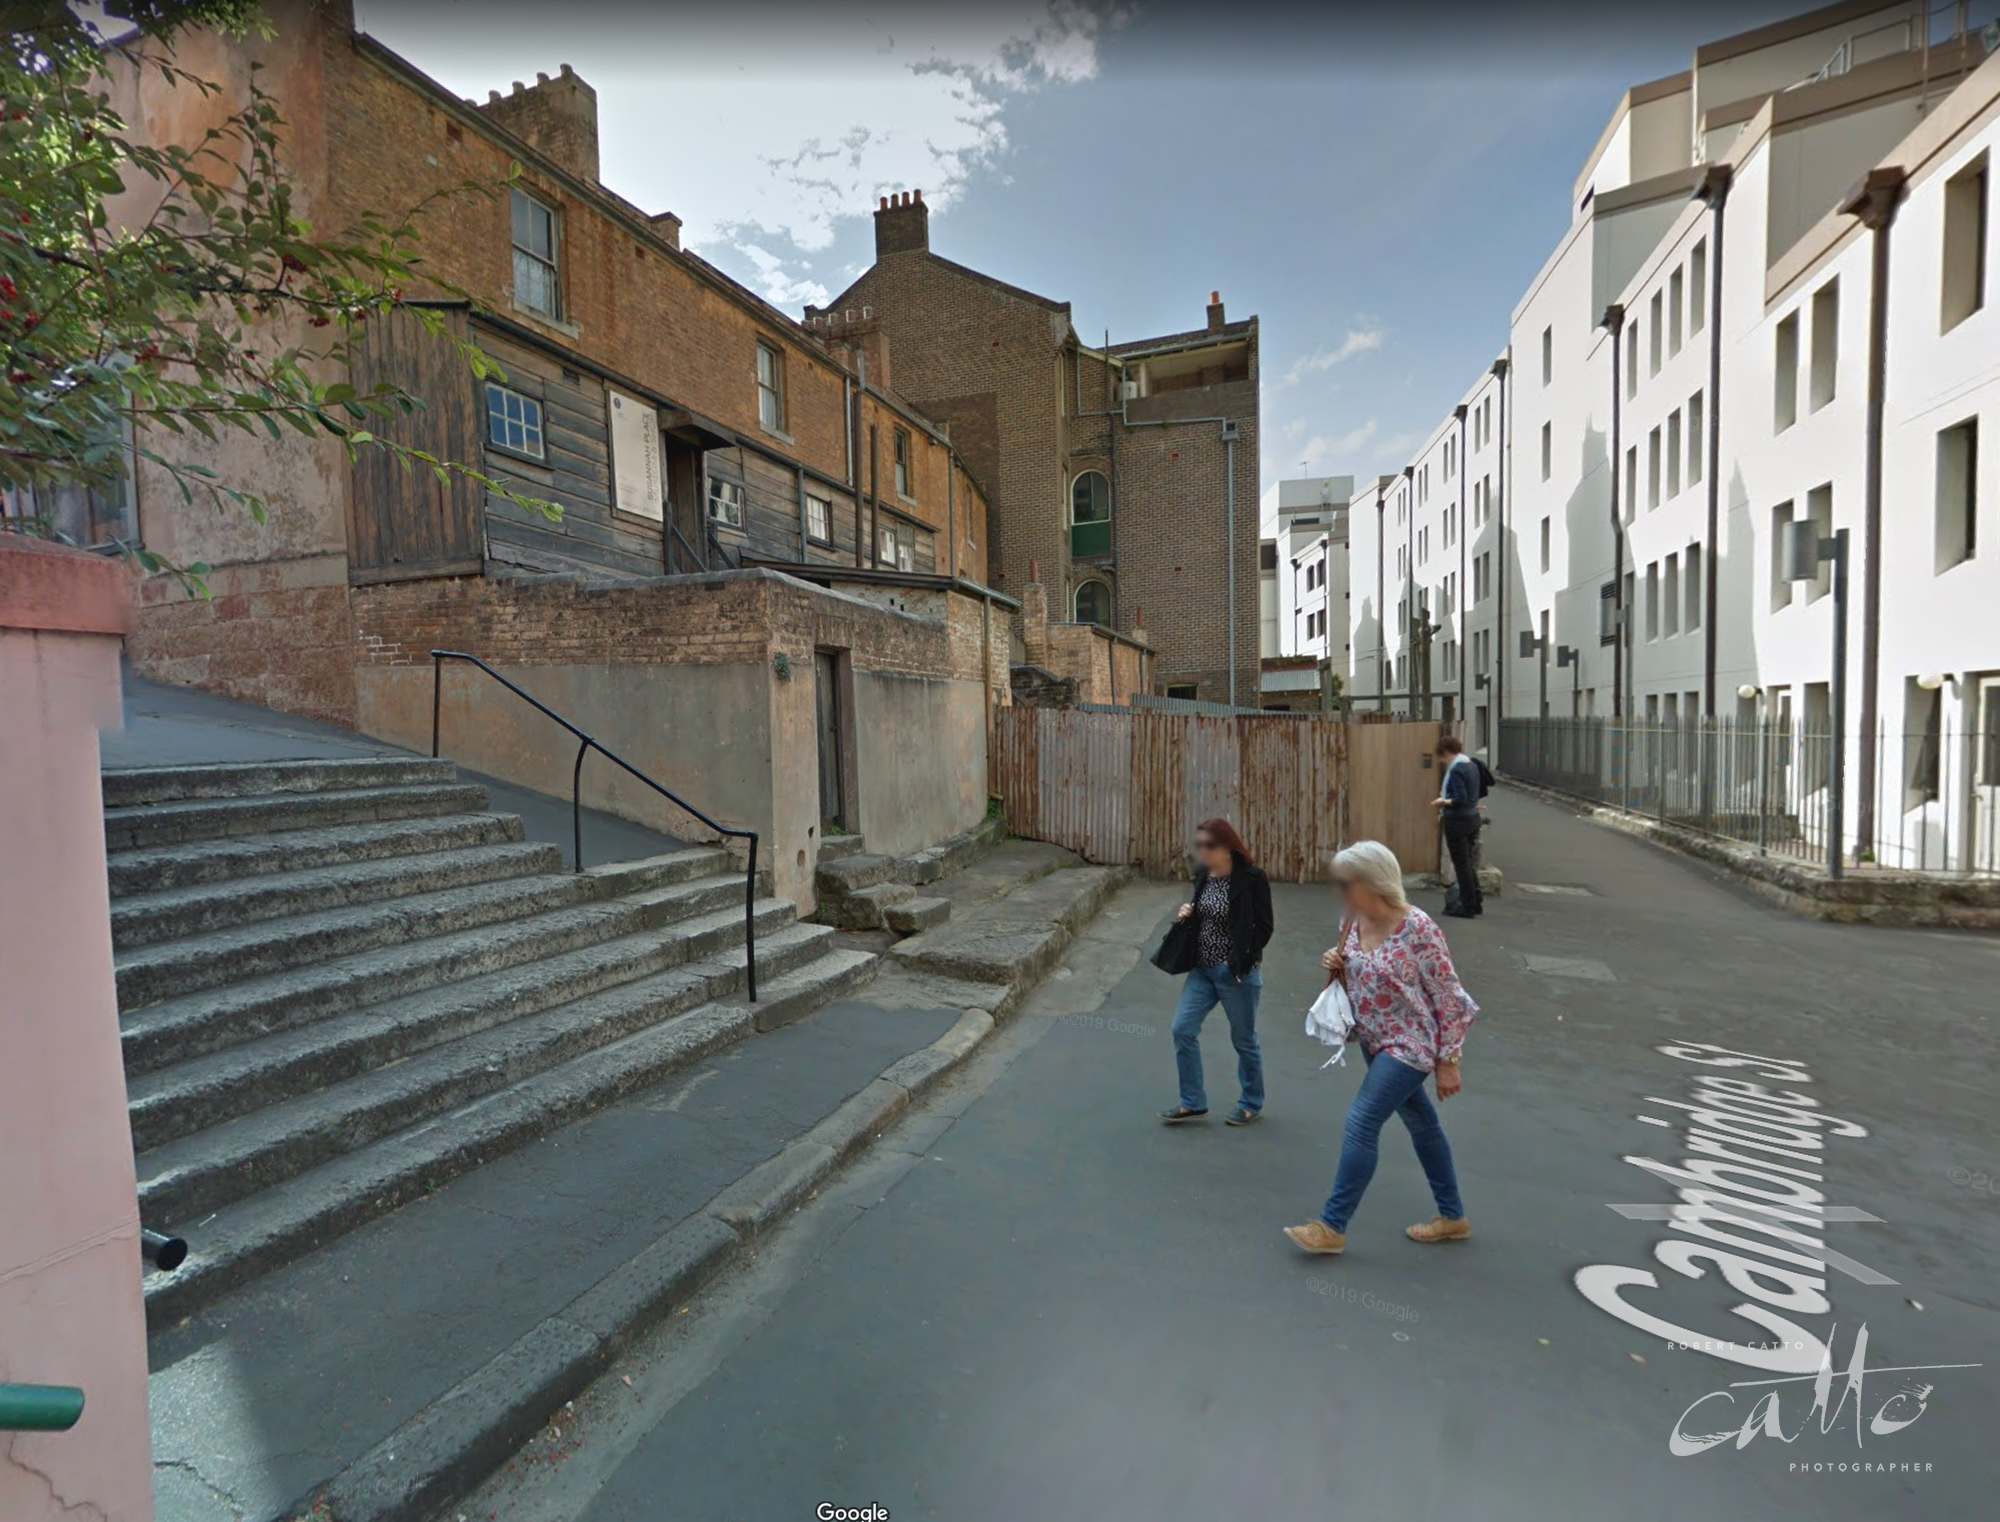  Google Street View scouting image of our location in The Rocks 